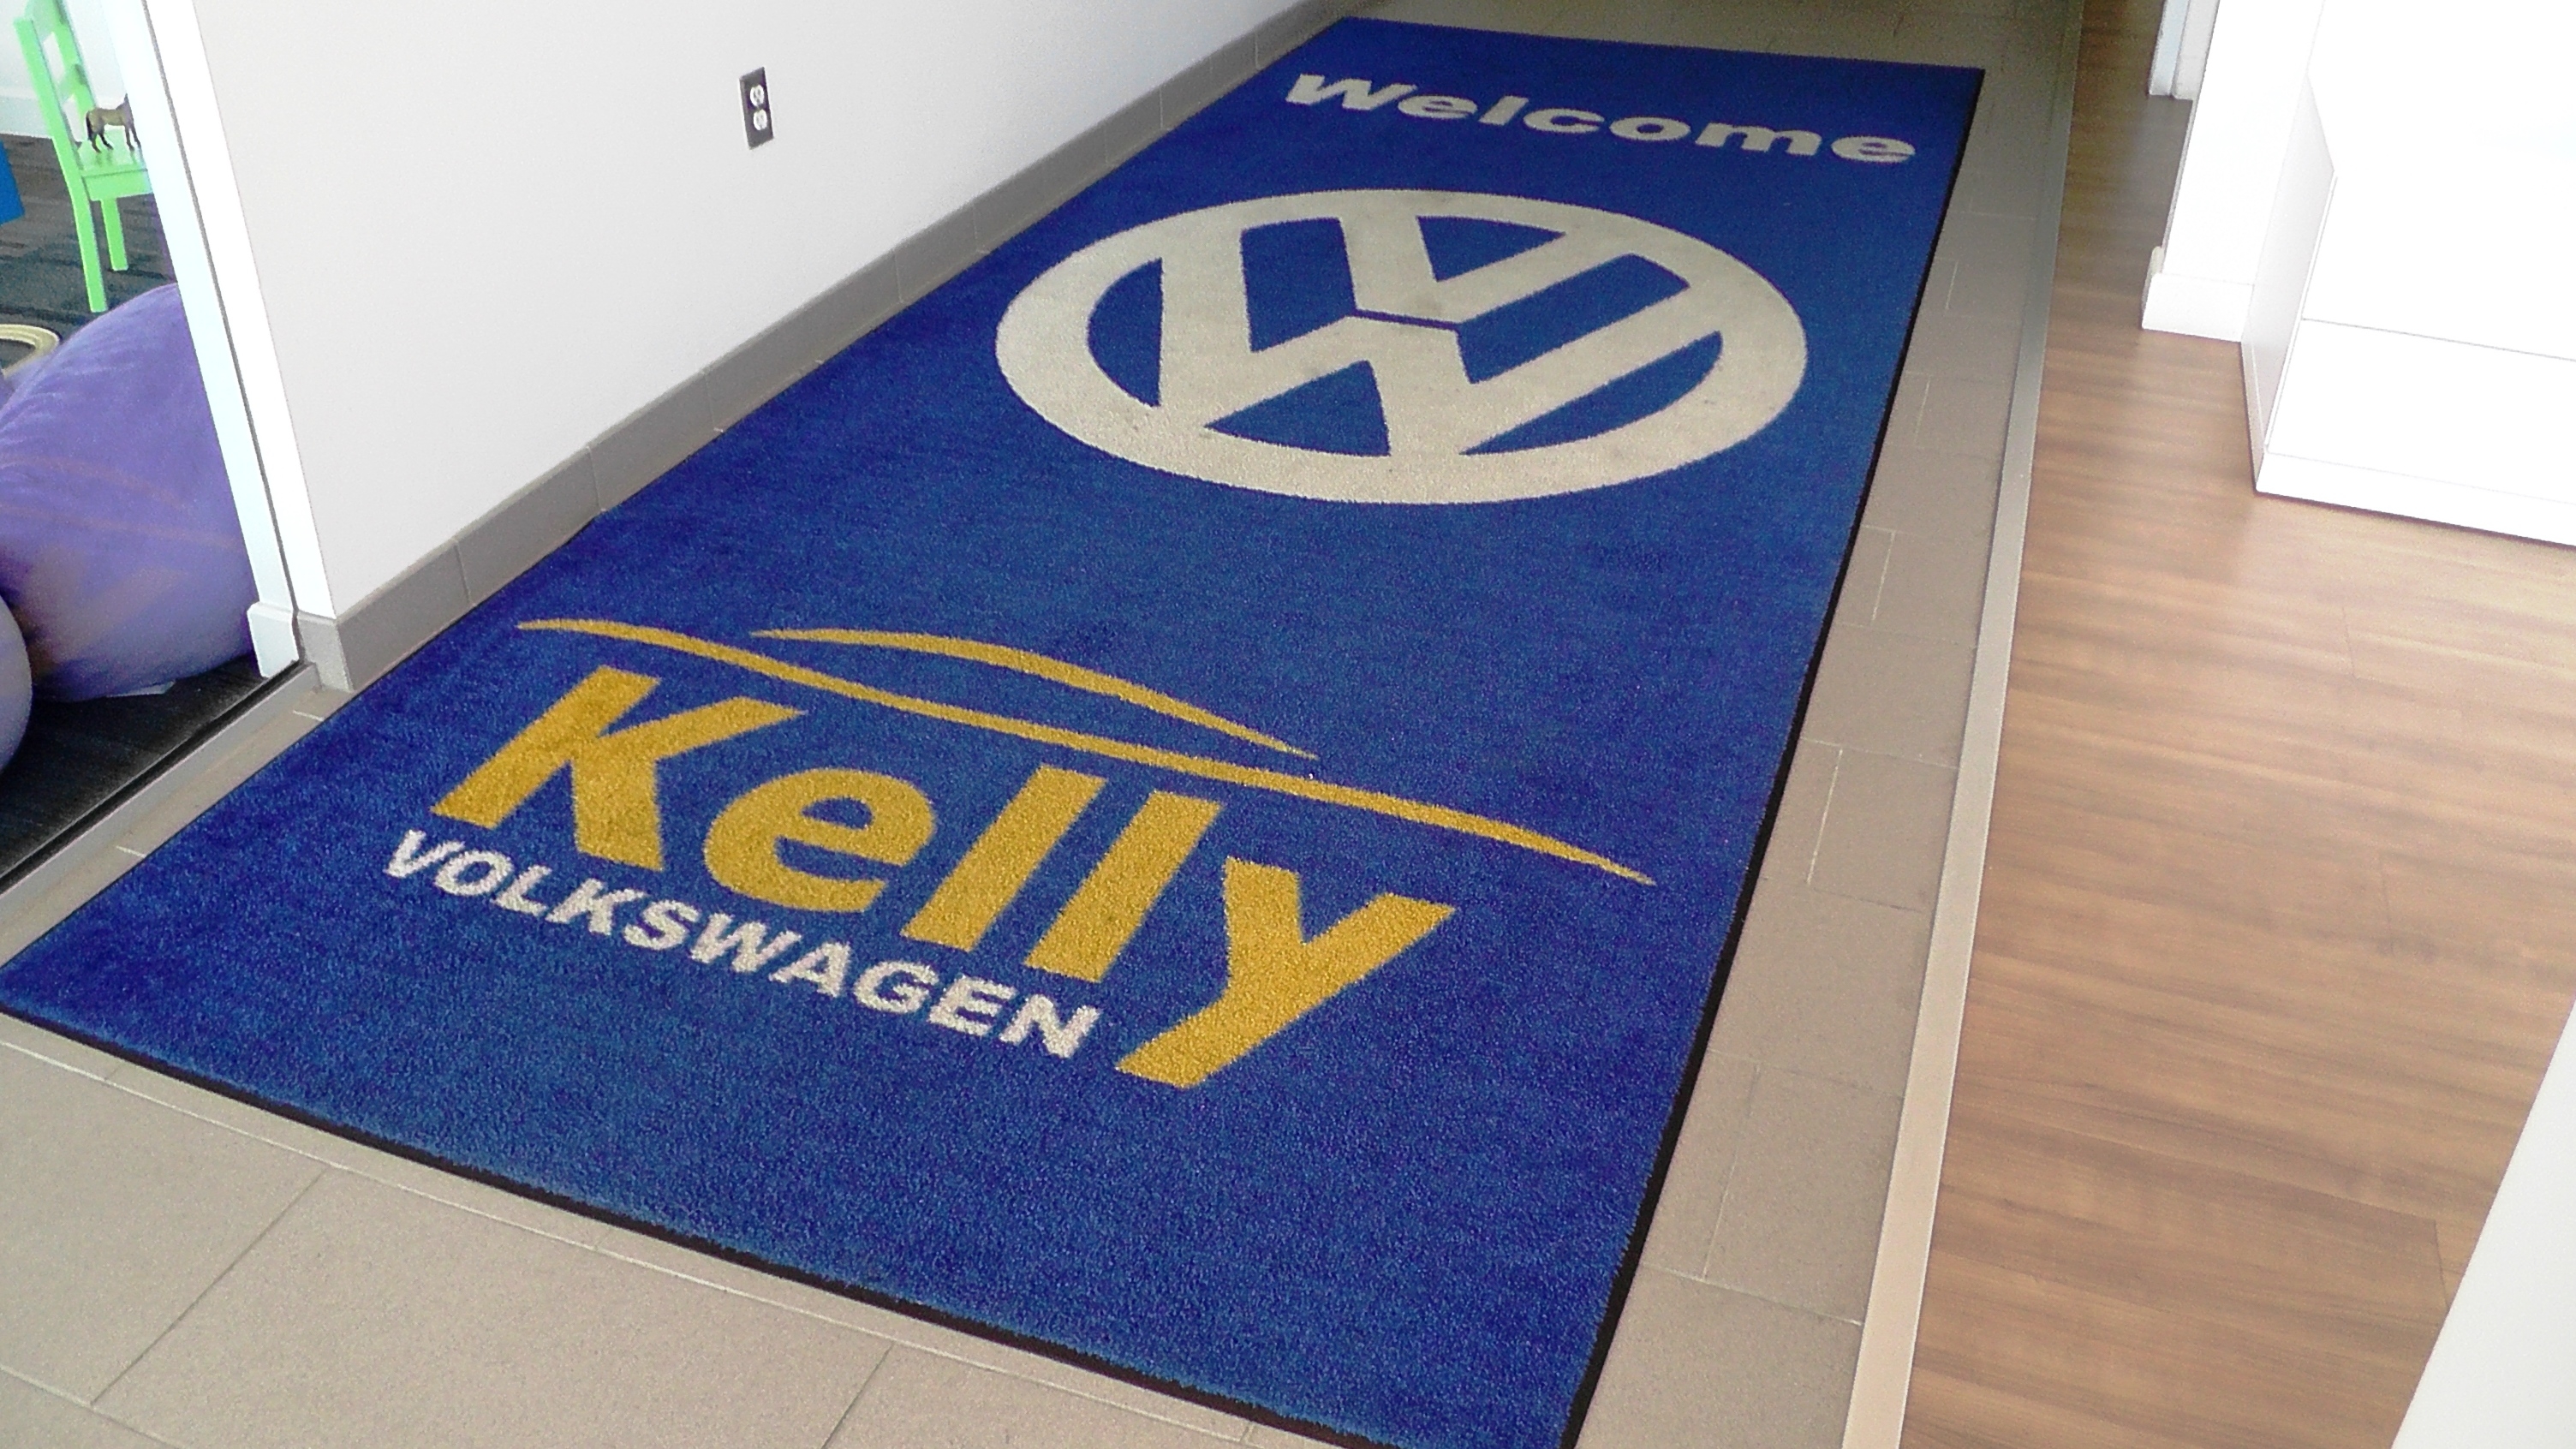 Nothing says welcome to Kelly Volkswagen like a Welcome mat right? It's a small touch, but one that we think tells you how much we appreciate you visiting our dealership. You'll also find a large welcome sign just above this area.